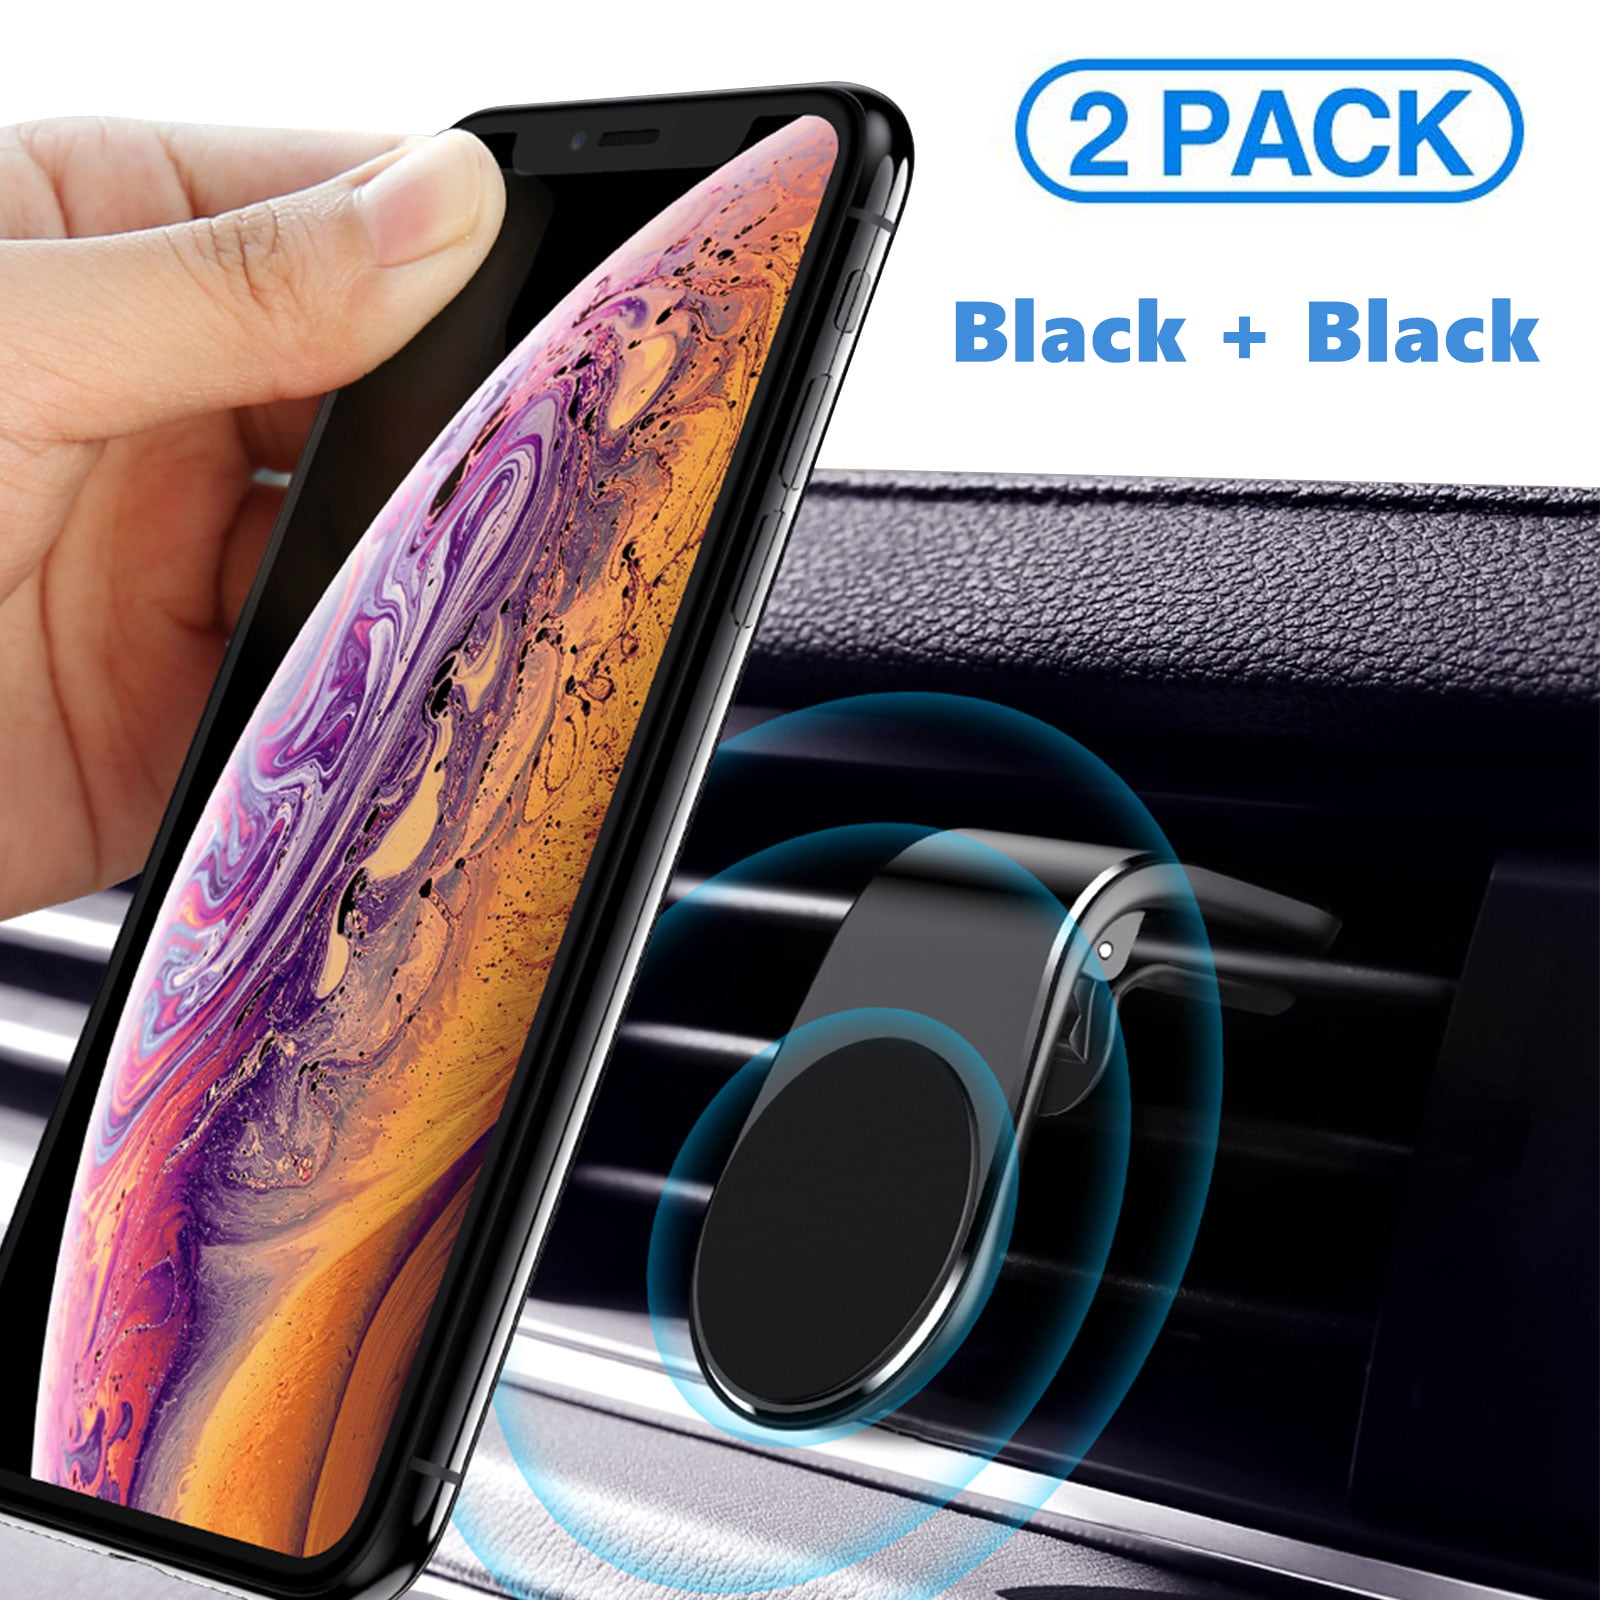 AMIRICO Magnetic Cell Phone Air Conditioning Vent Mount Phone Holder for Cars Rotating Design Easy Installation Holds iPhones Small Tablets Black CrazyEdE JP1010008 Strong Magnet Head Smartphones GPS